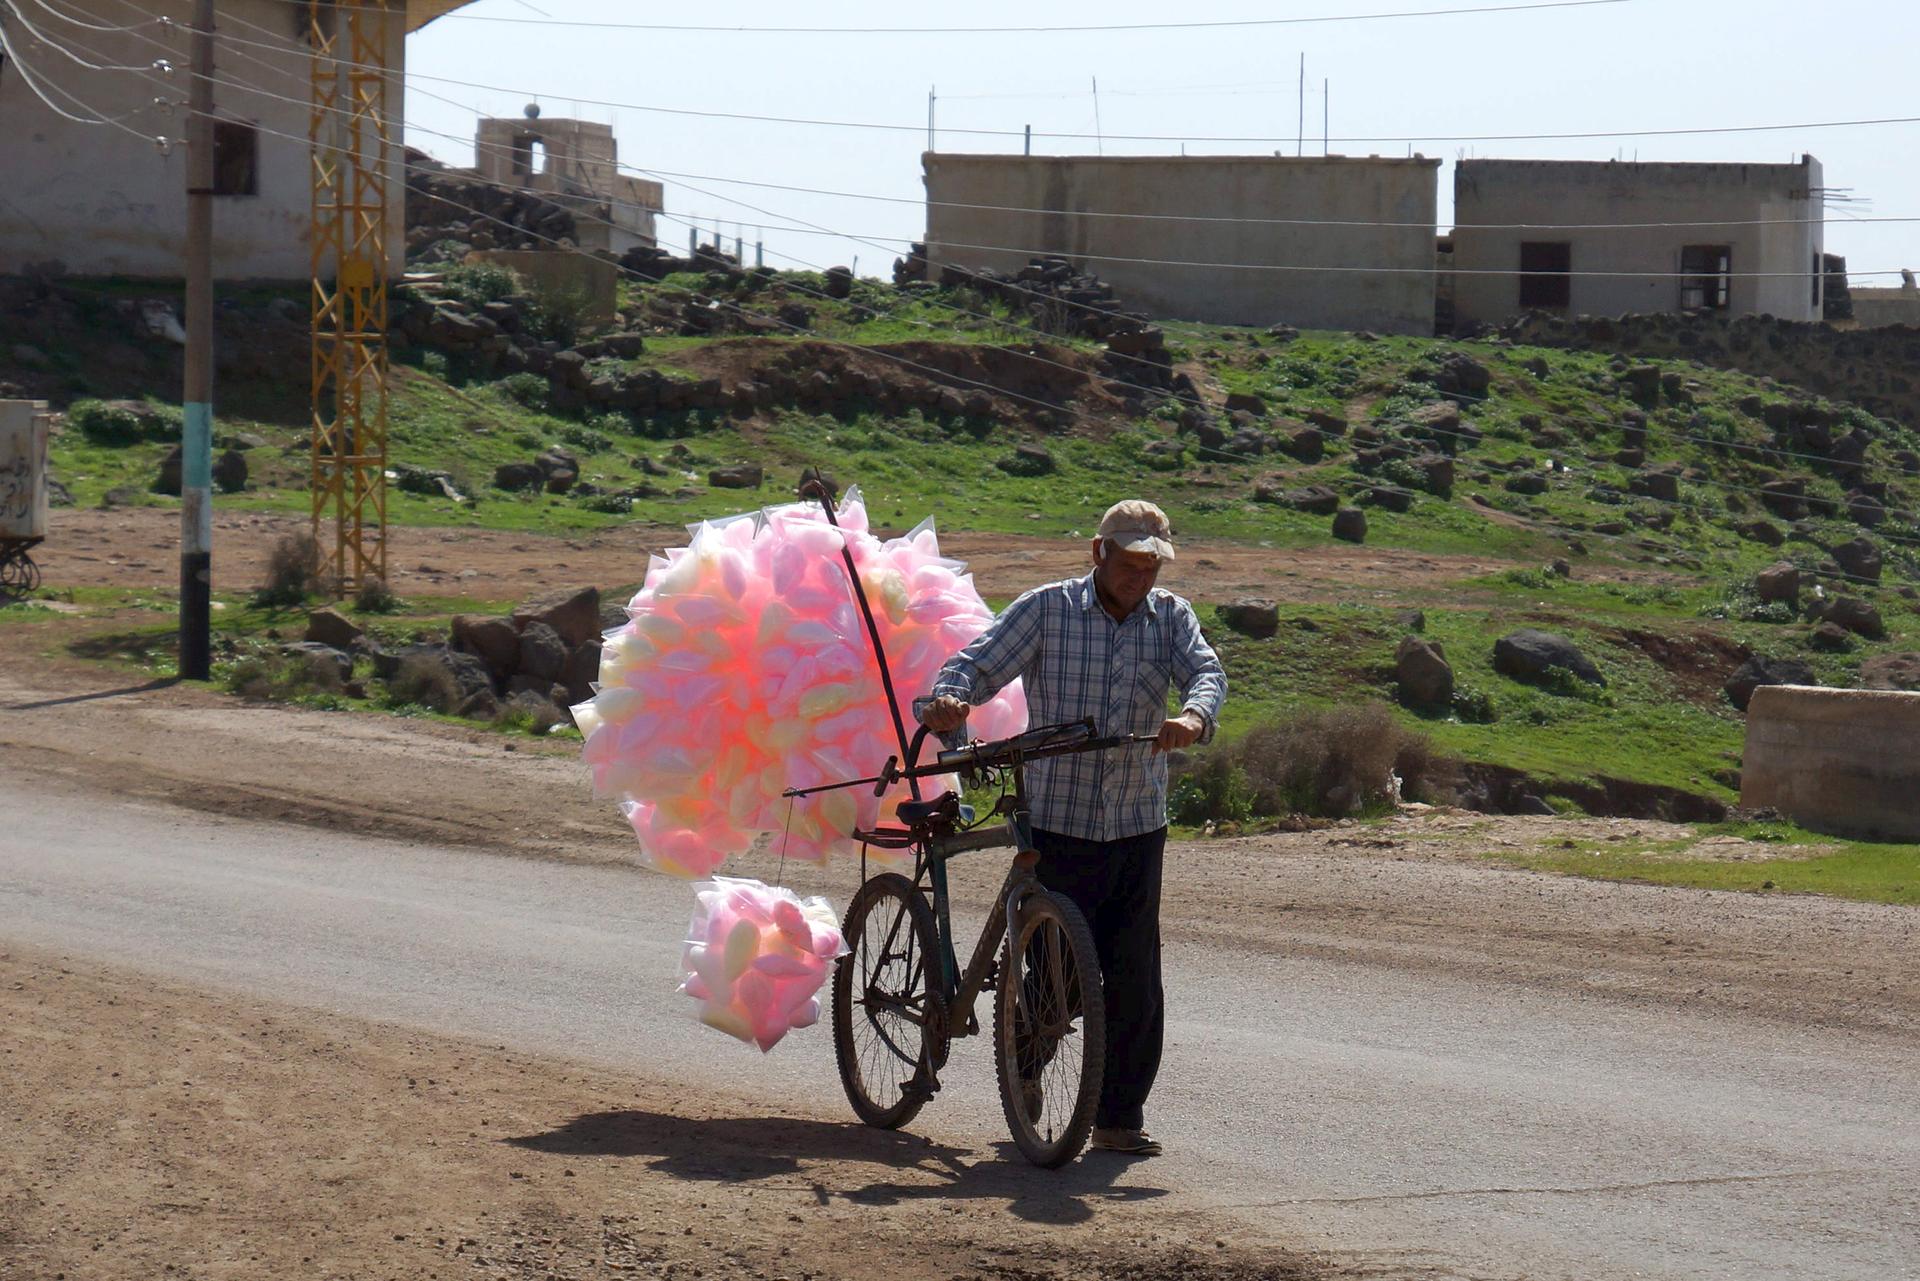 A man sells cotton candy as he pushes his bicycle along a street in the rebel held al-Ghariyah al-Gharbiyah town, in Deraa province.